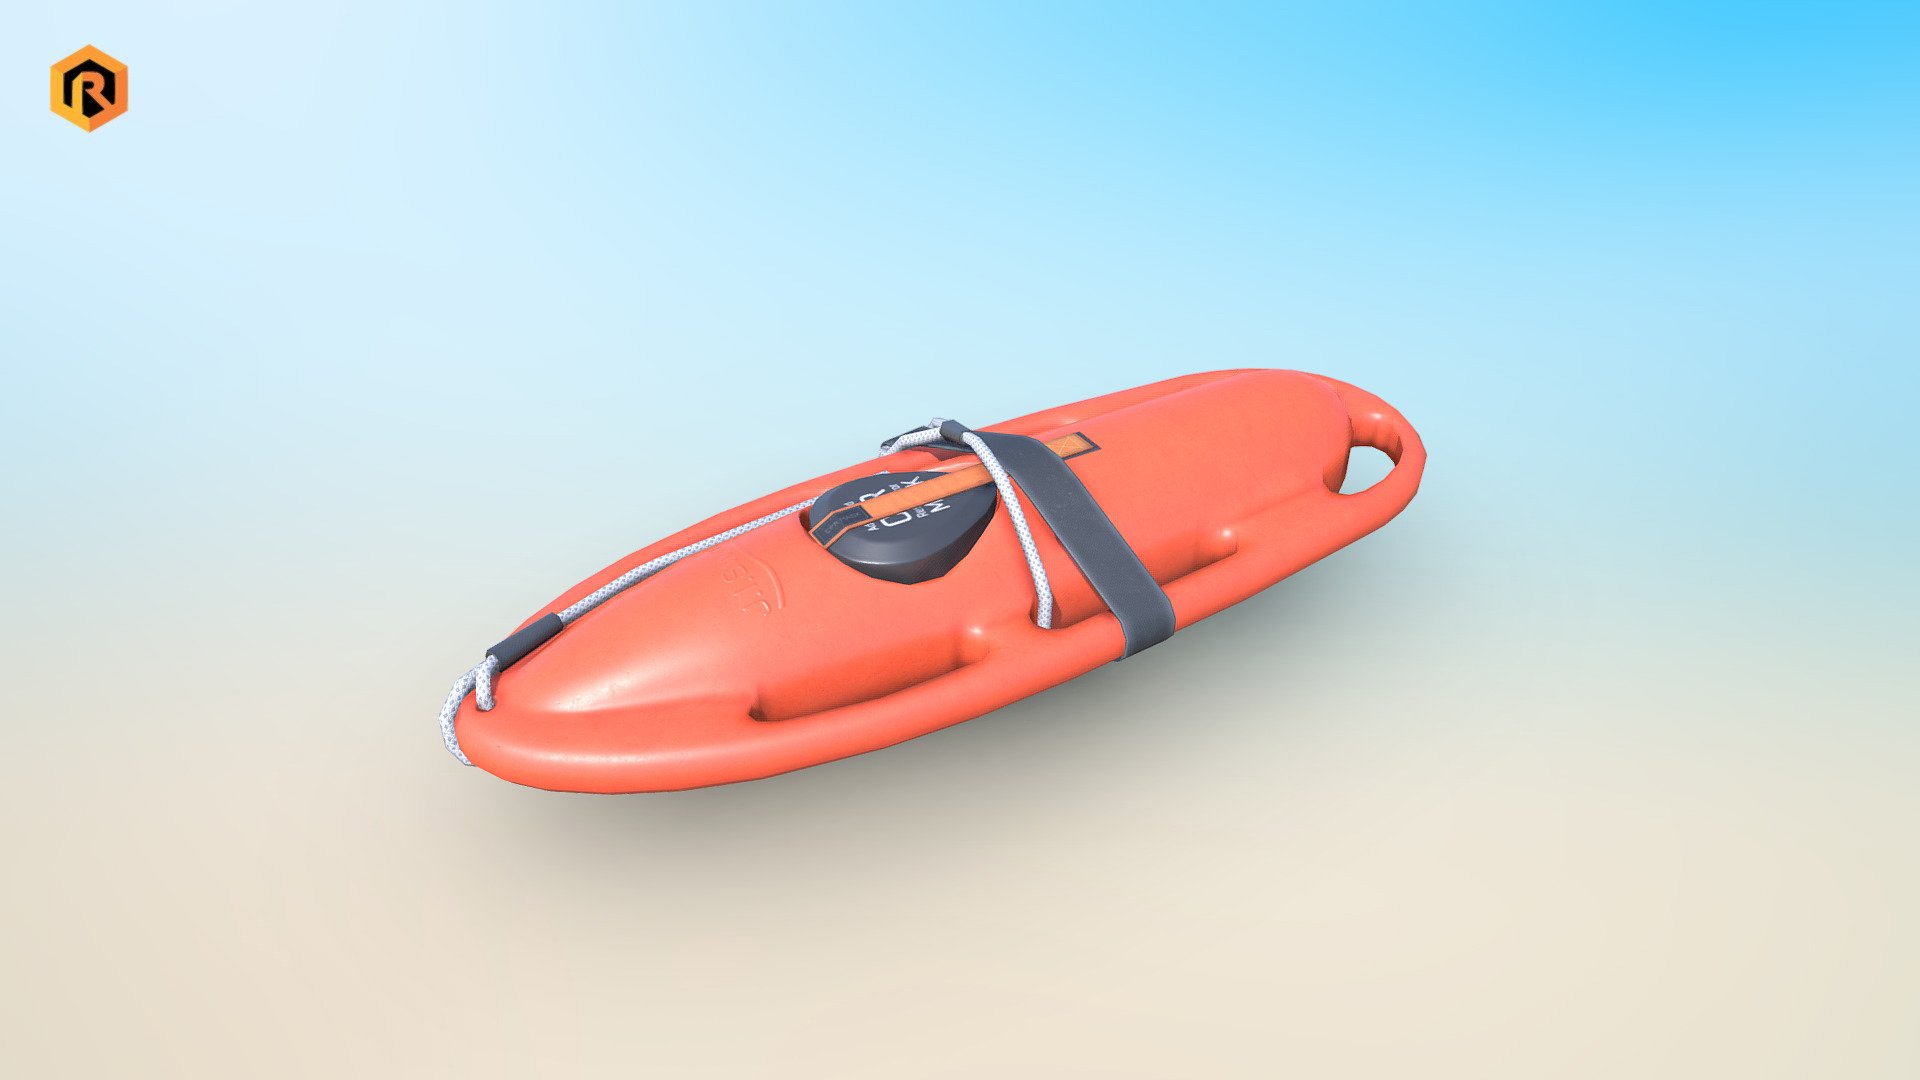 High-quality low-poly PBR 3D model of Lifeguard Rescue Buoy. 

It is best for use in games and other VR / AR, real-time applications such as Unity or Unreal Engine. 

It can also be rendered in Blender (ex Cycles) or Vray as the model is equipped with all required PBR textures. 

Model is built with great attention to details and realistic proportions with correct geometry.

PBR texture sets are very detailed so it makes this model good enough for close-up.  

Technical details: 

- 2048px PBR Main Body texture set  (Albedo, Metallic, Smoothness, Normal, AO) 

- 1531 Triangles

- 1222  Vertices 
- Model is one mesh

- Model completely unwrapped

- Model is fully textured with all materials applied

- Pivot points are correctly placed to suit animation process

- Model scaled to approximate real world size (centimeters)

- All nodes, materials and textures are appropriately named - Lifeguard Rescue Buoy - Buy Royalty Free 3D model by Rescue3D Assets (@rescue3d) 3d model